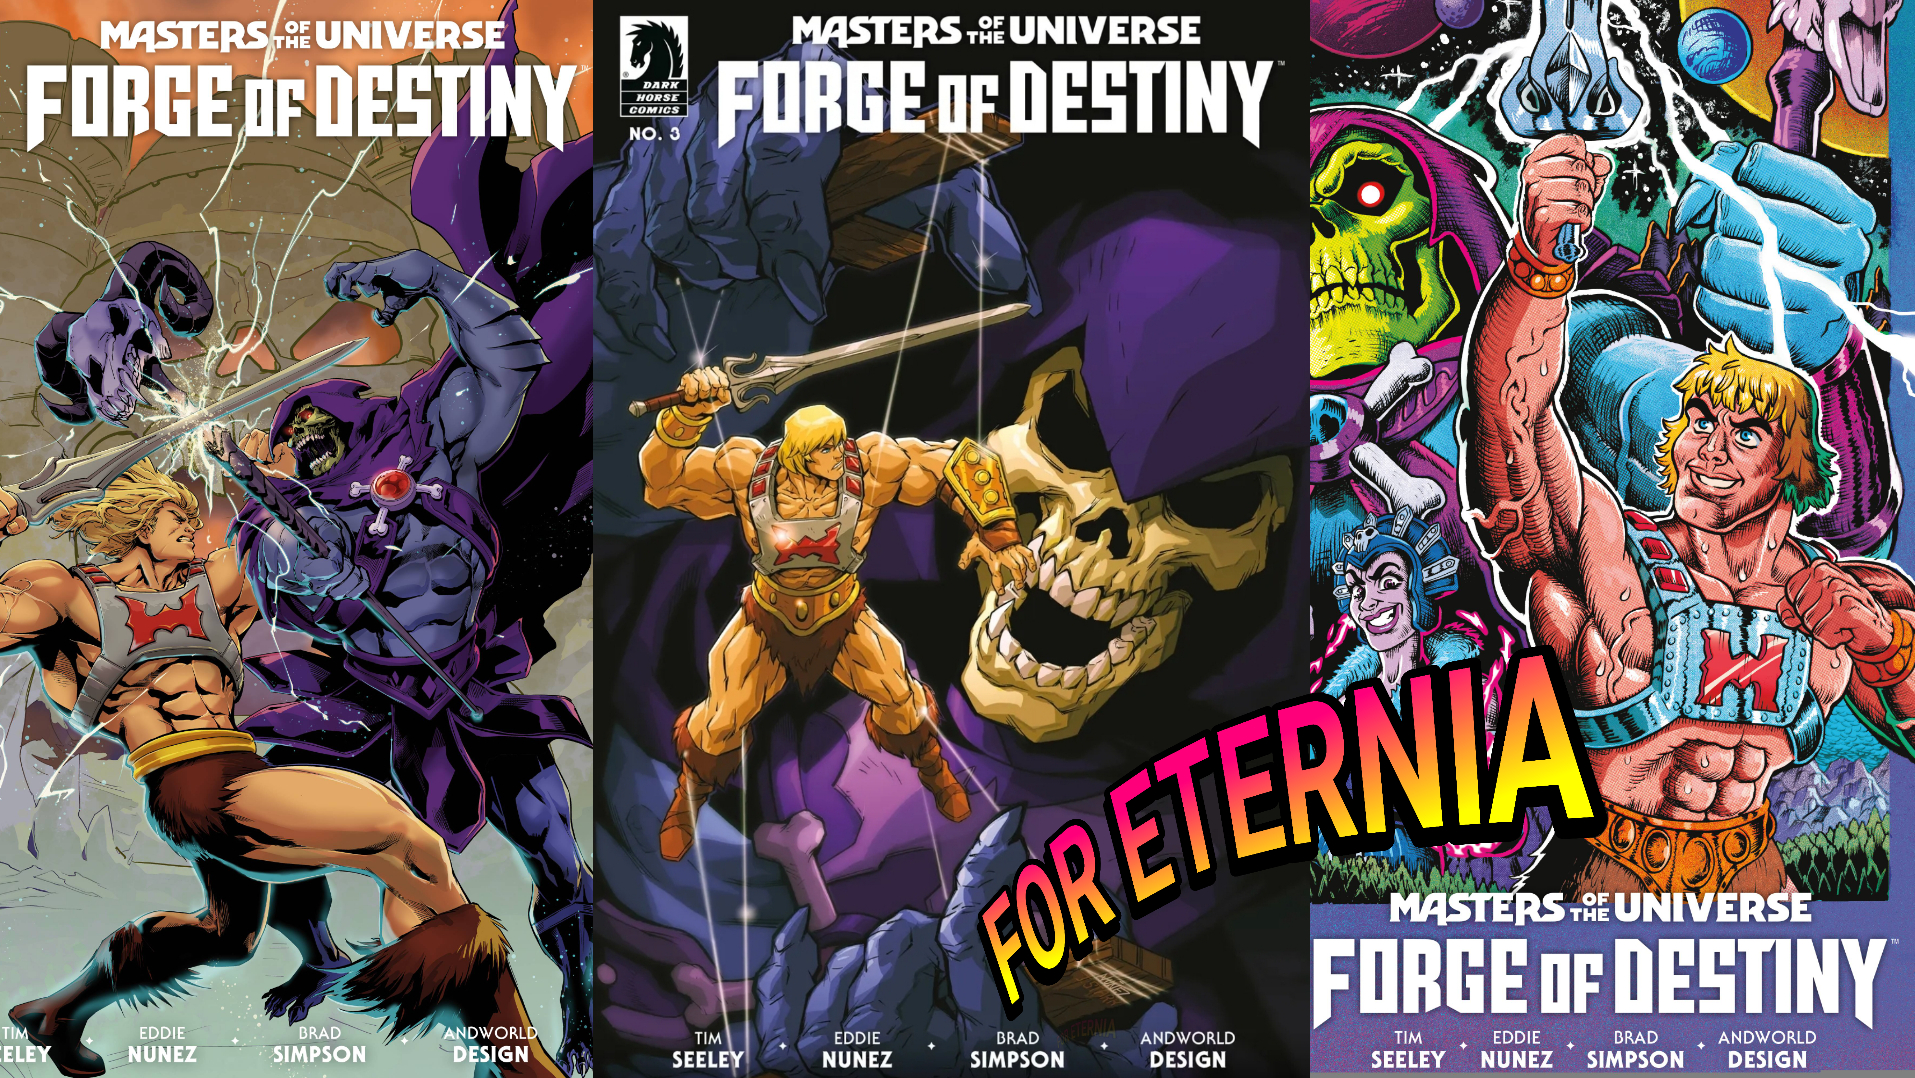 Dark Horse Comics FORGE OF DESTINY Issue #3 is out today!